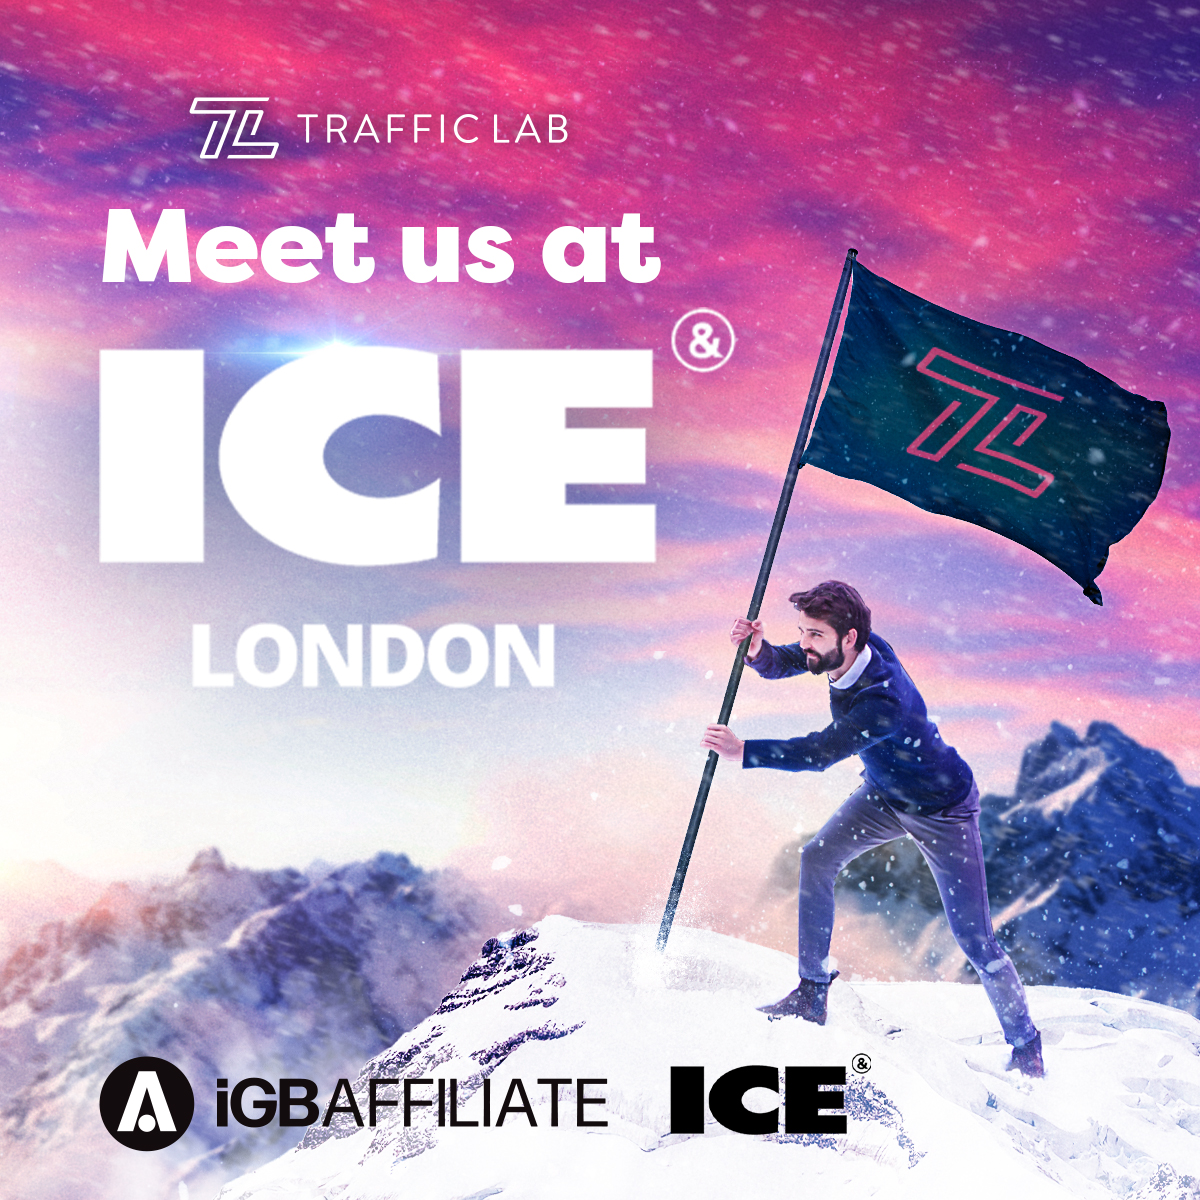 TrafficLab News - See you soon at ICE & iGB Affiliate, London!